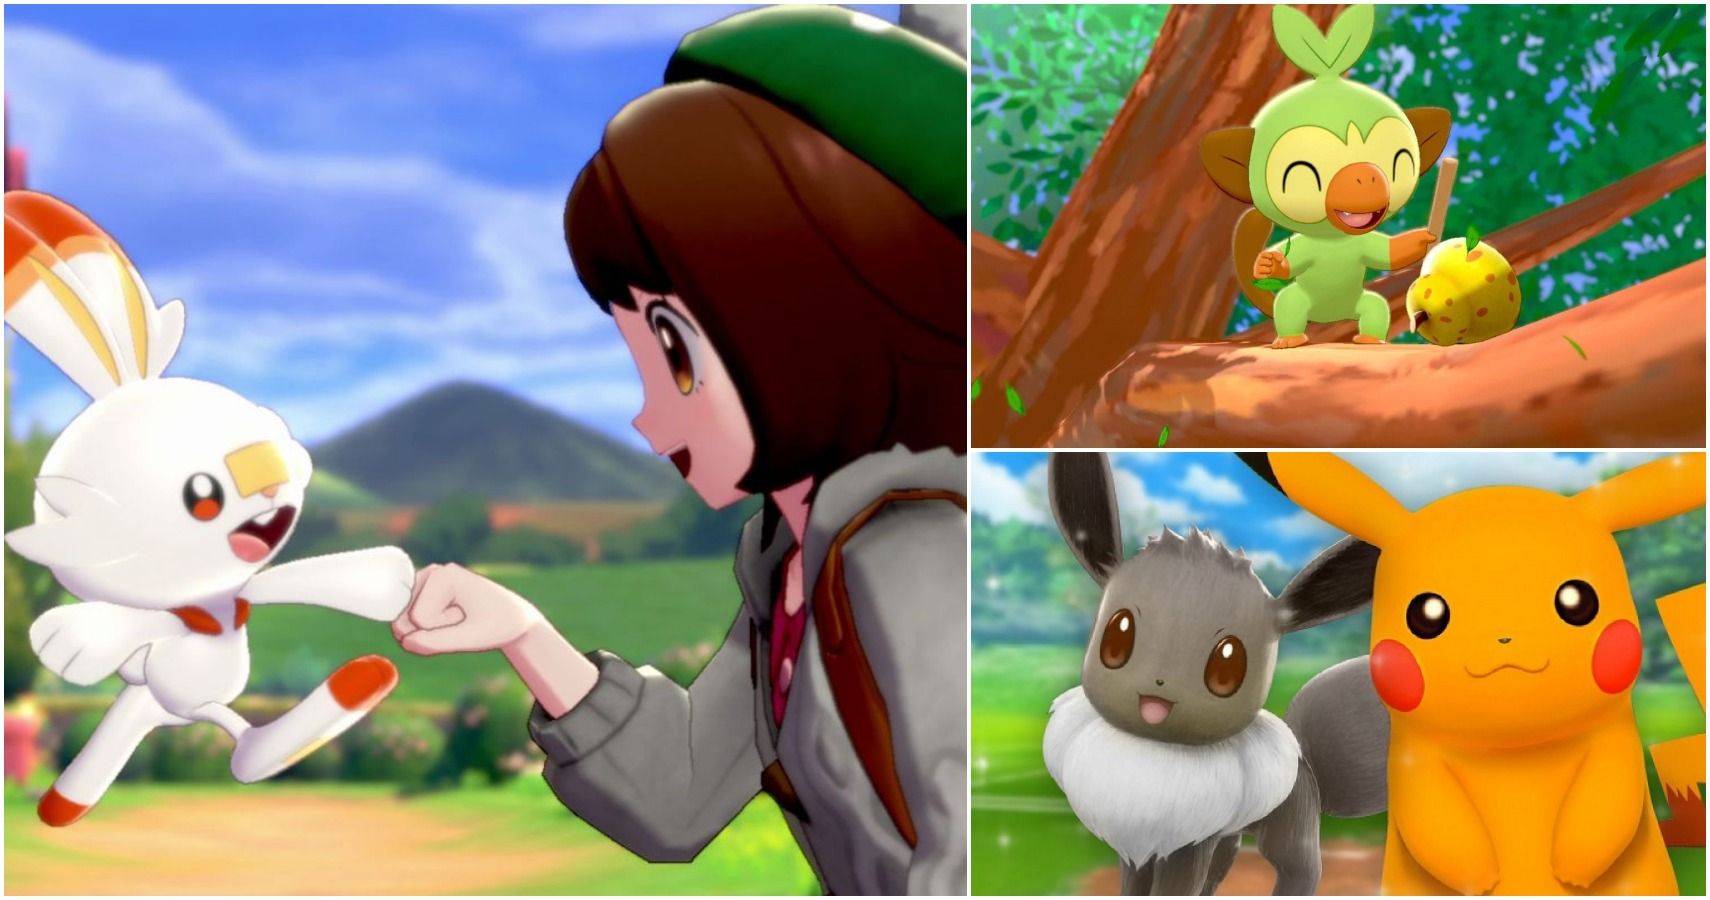 Pokemon: The Best Games To Shiny Hunt In, Ranked